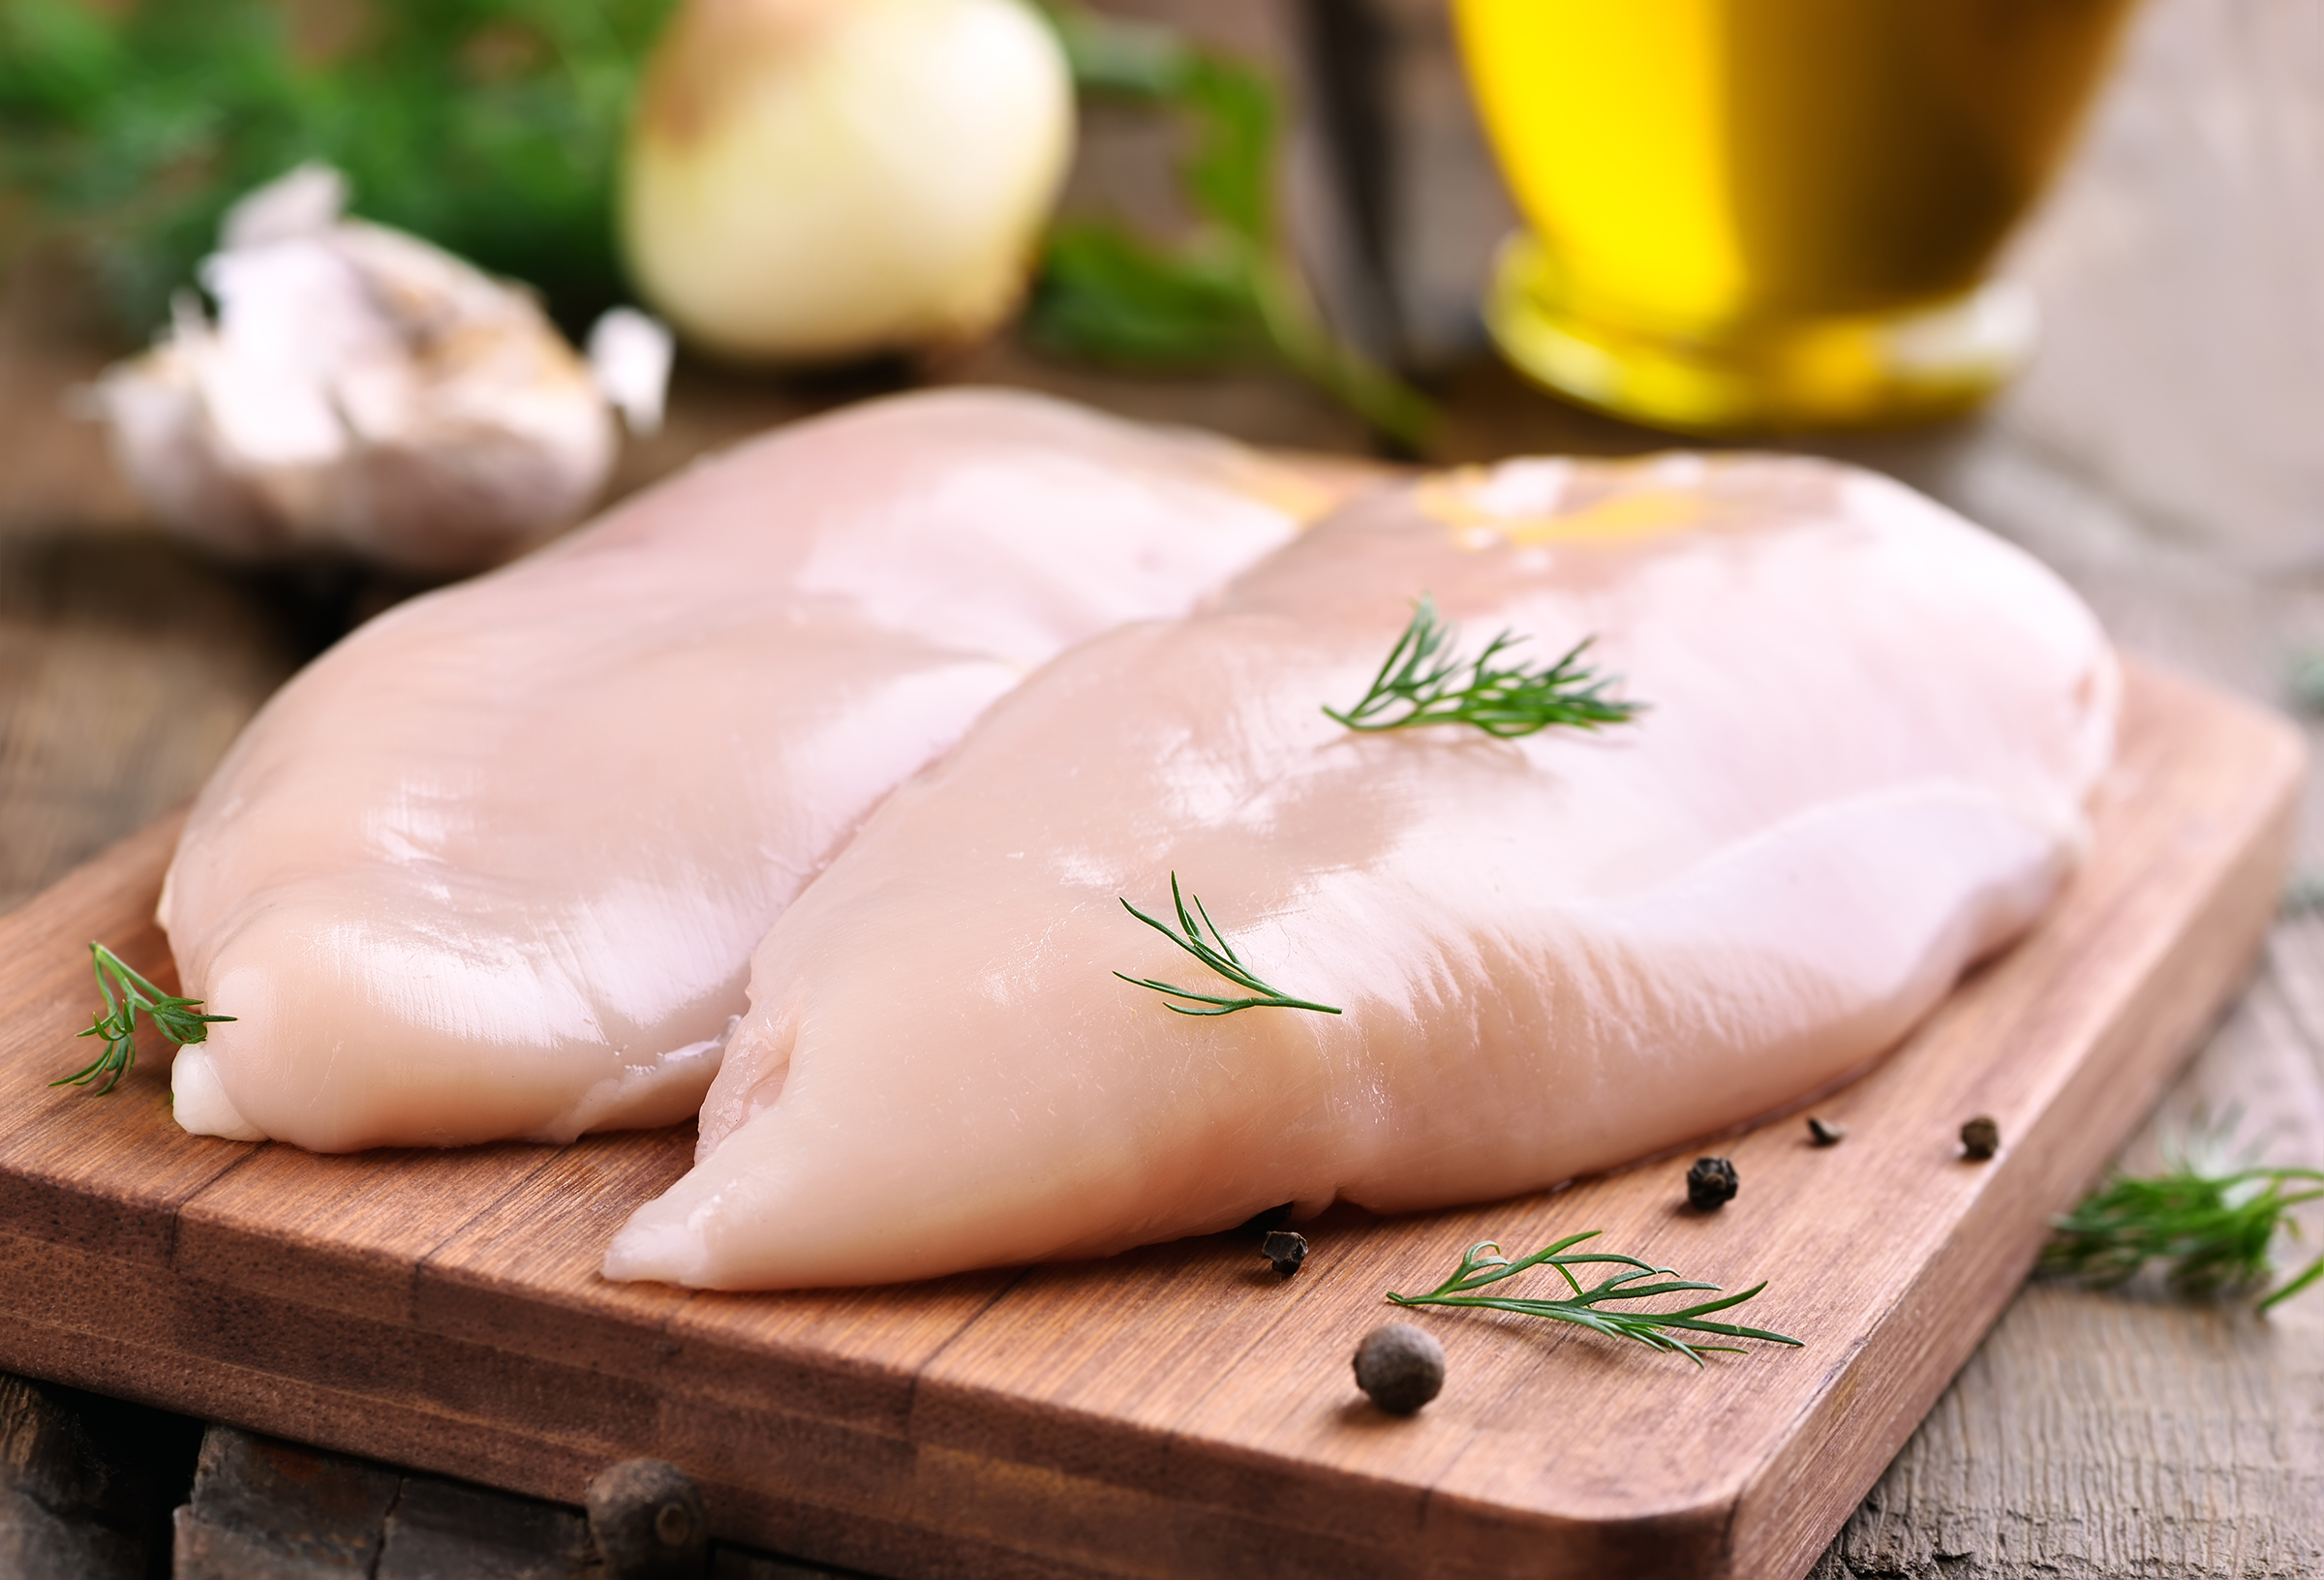 The 5 things poultry processors can do to prepare for the future